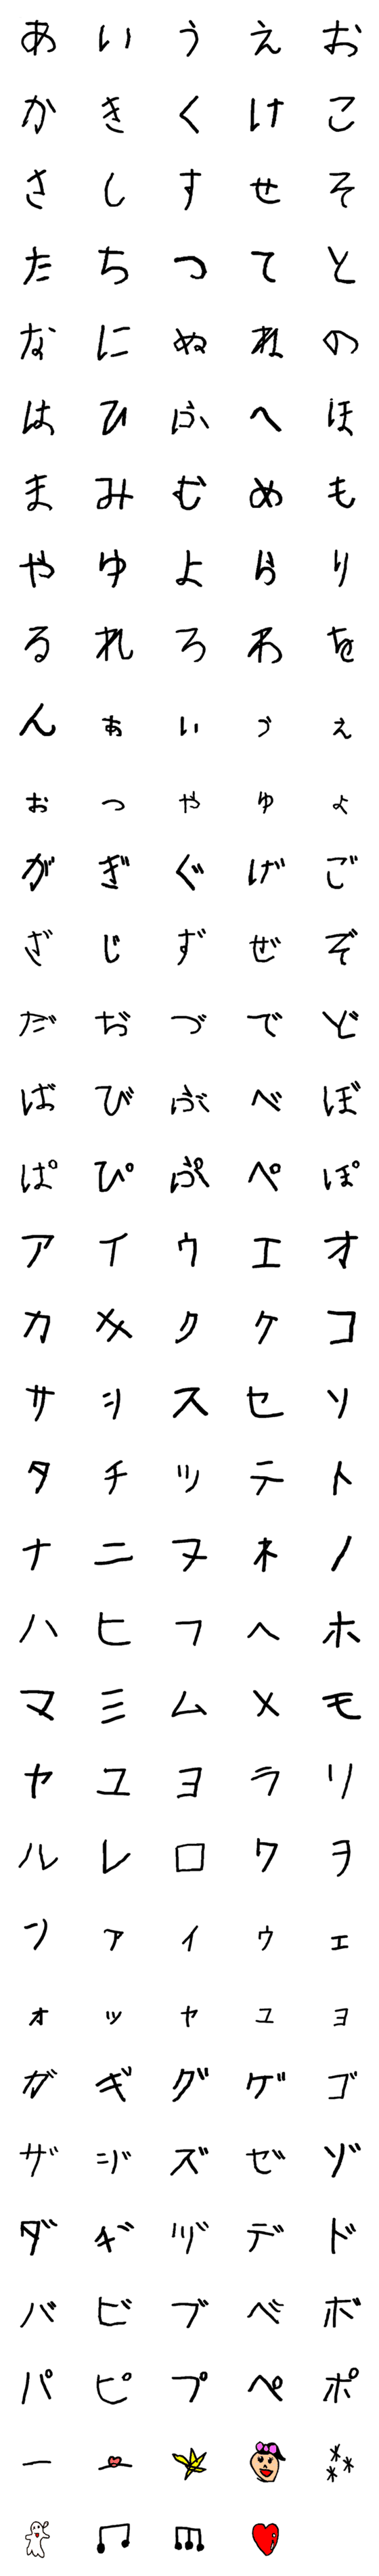 [LINE絵文字]6歳の文字の画像一覧